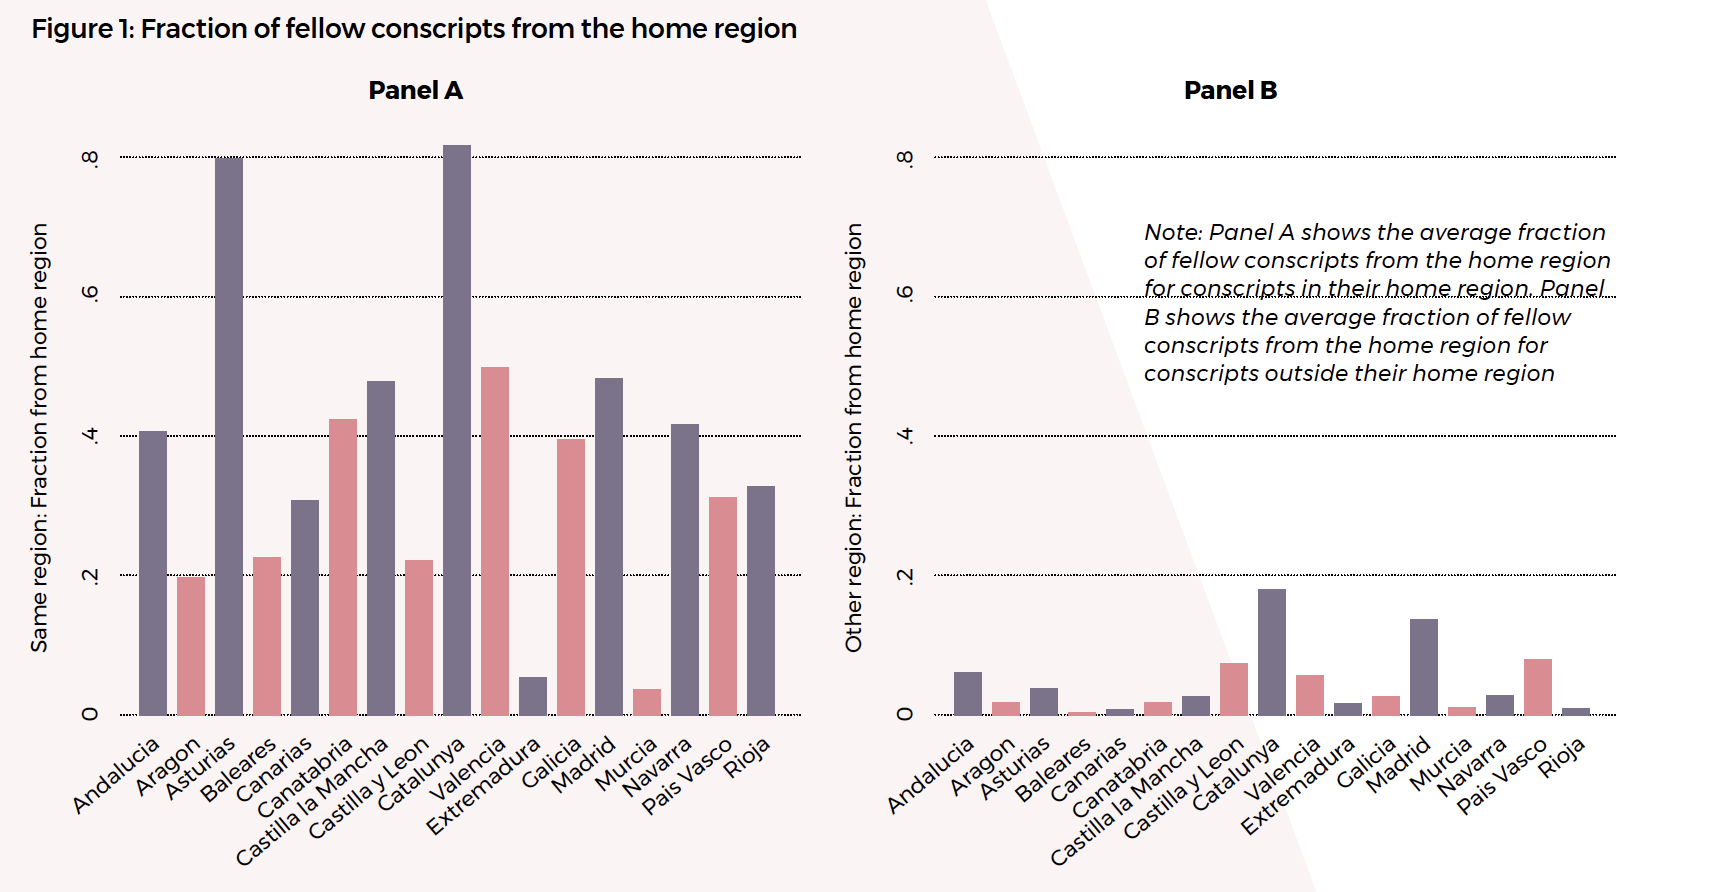 Figure 1: Fraction of fellow conscripts from the home region